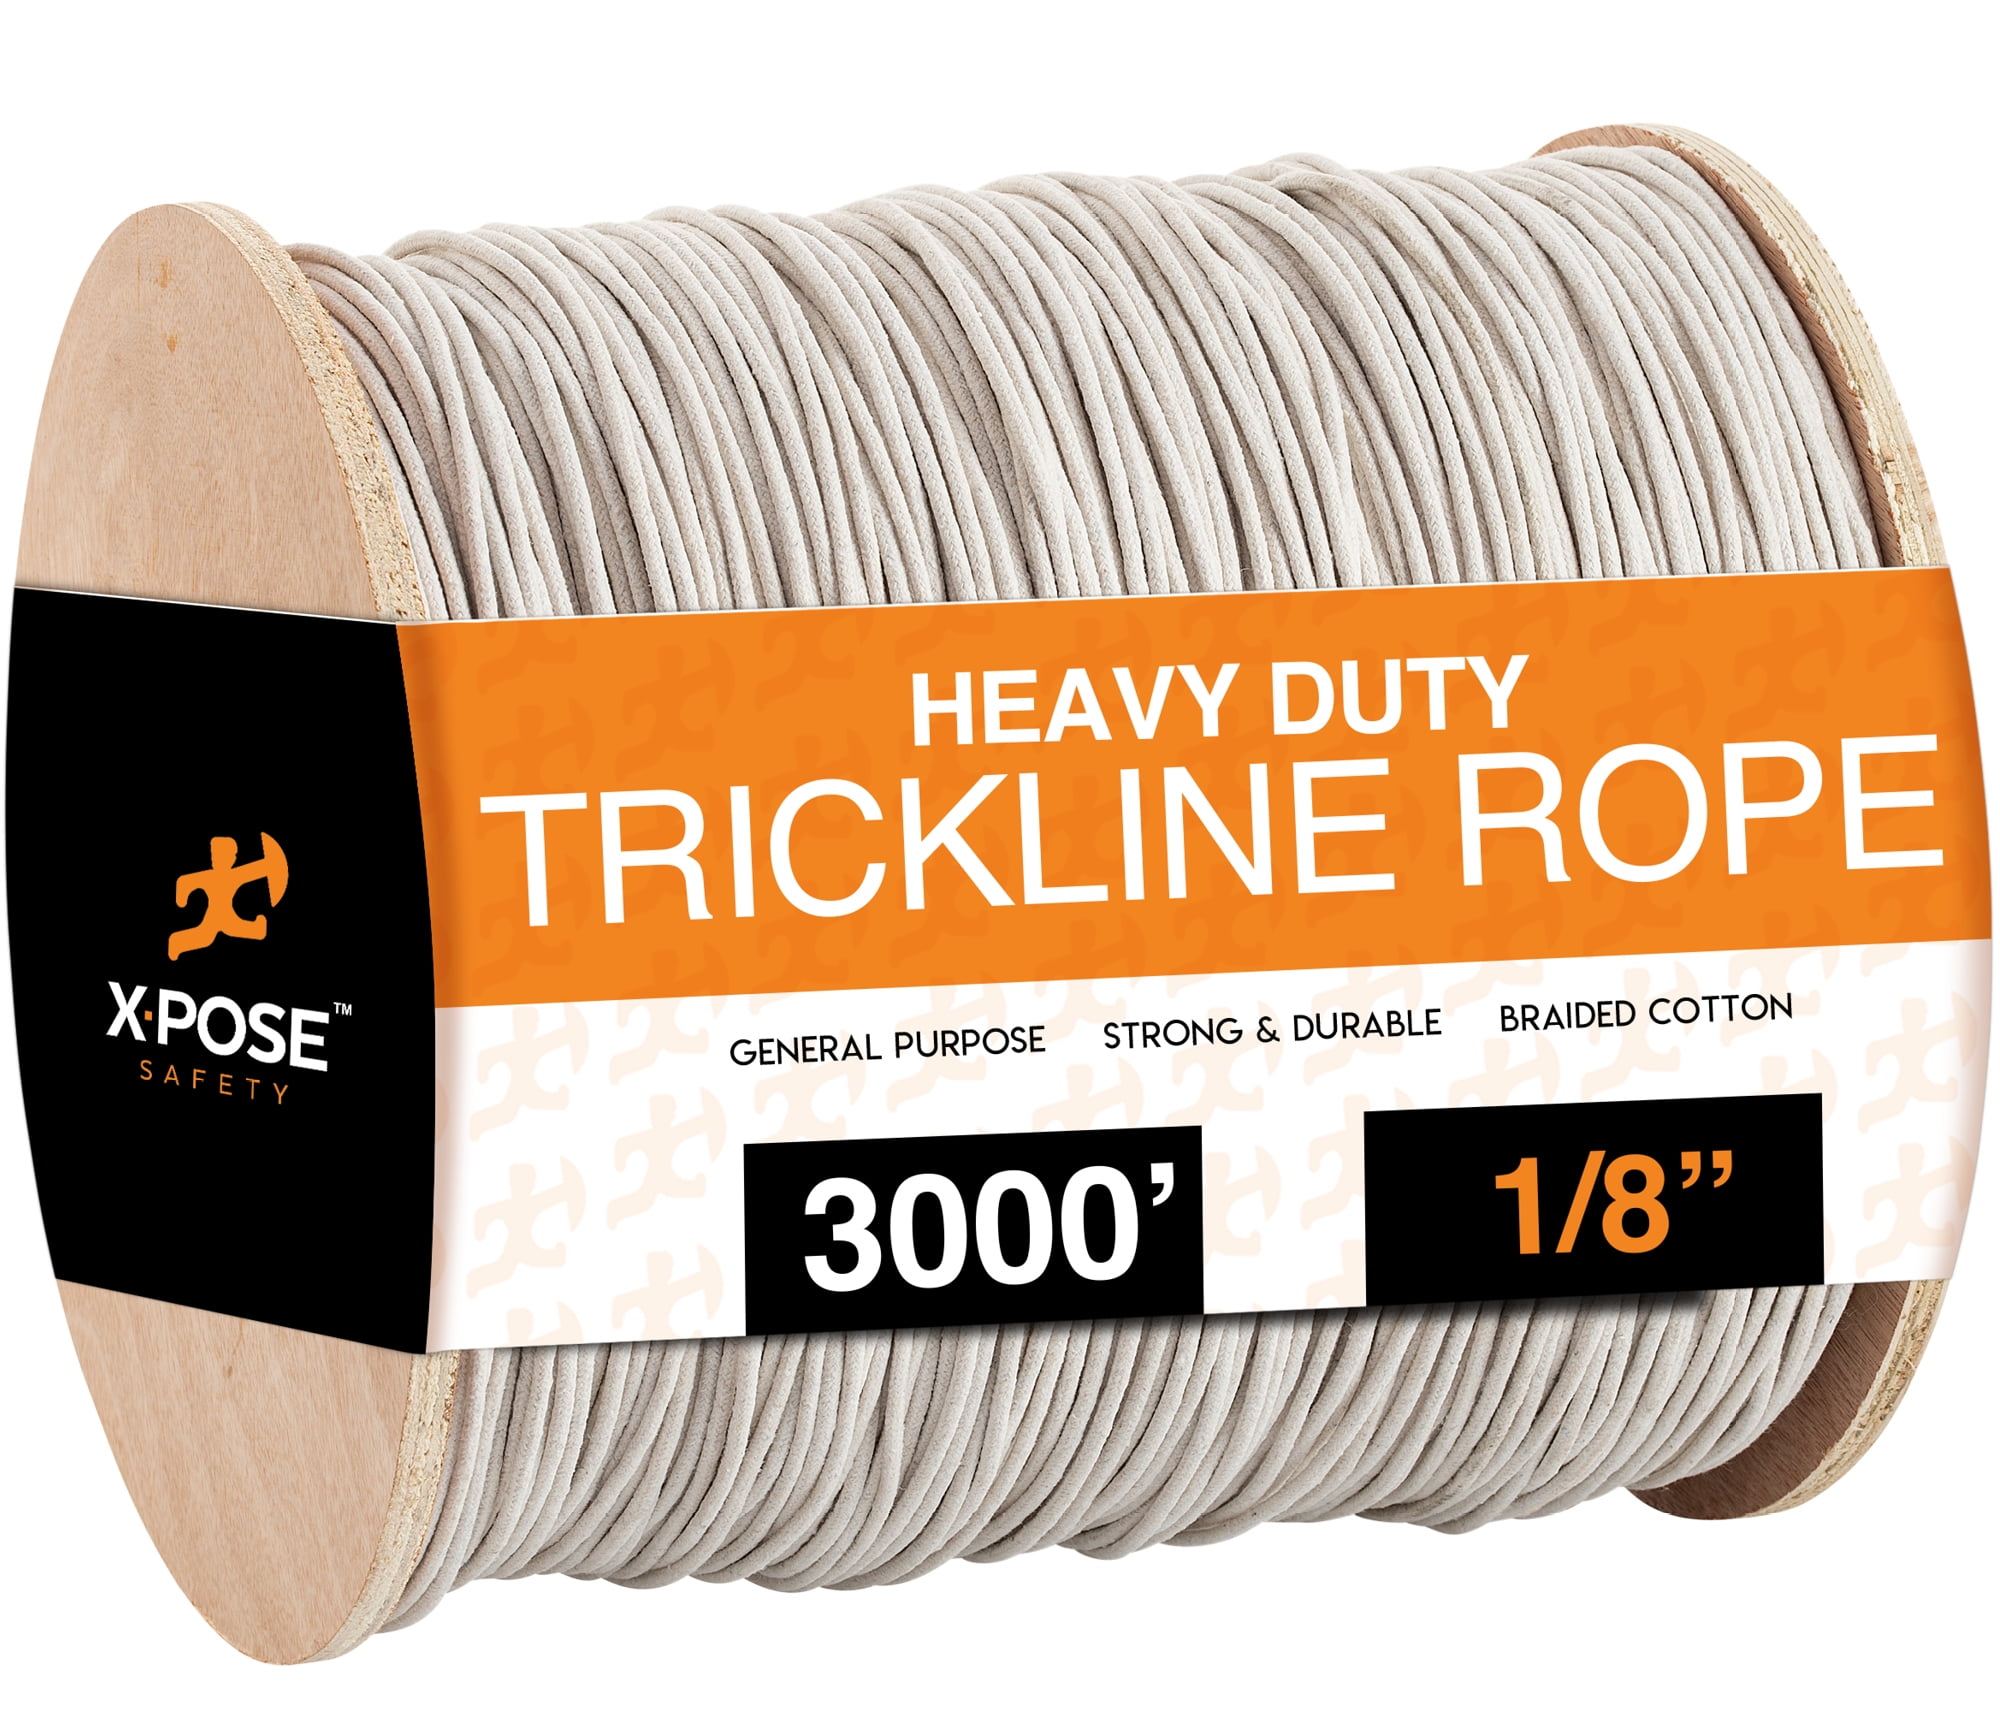 White Unglazed Trickline Rope - 3,000 ft x 1/8 inch Theatrical Tie Line  Heavy Duty Spool, Cable Management and Wire Tie - for Theatre, Stage Decor